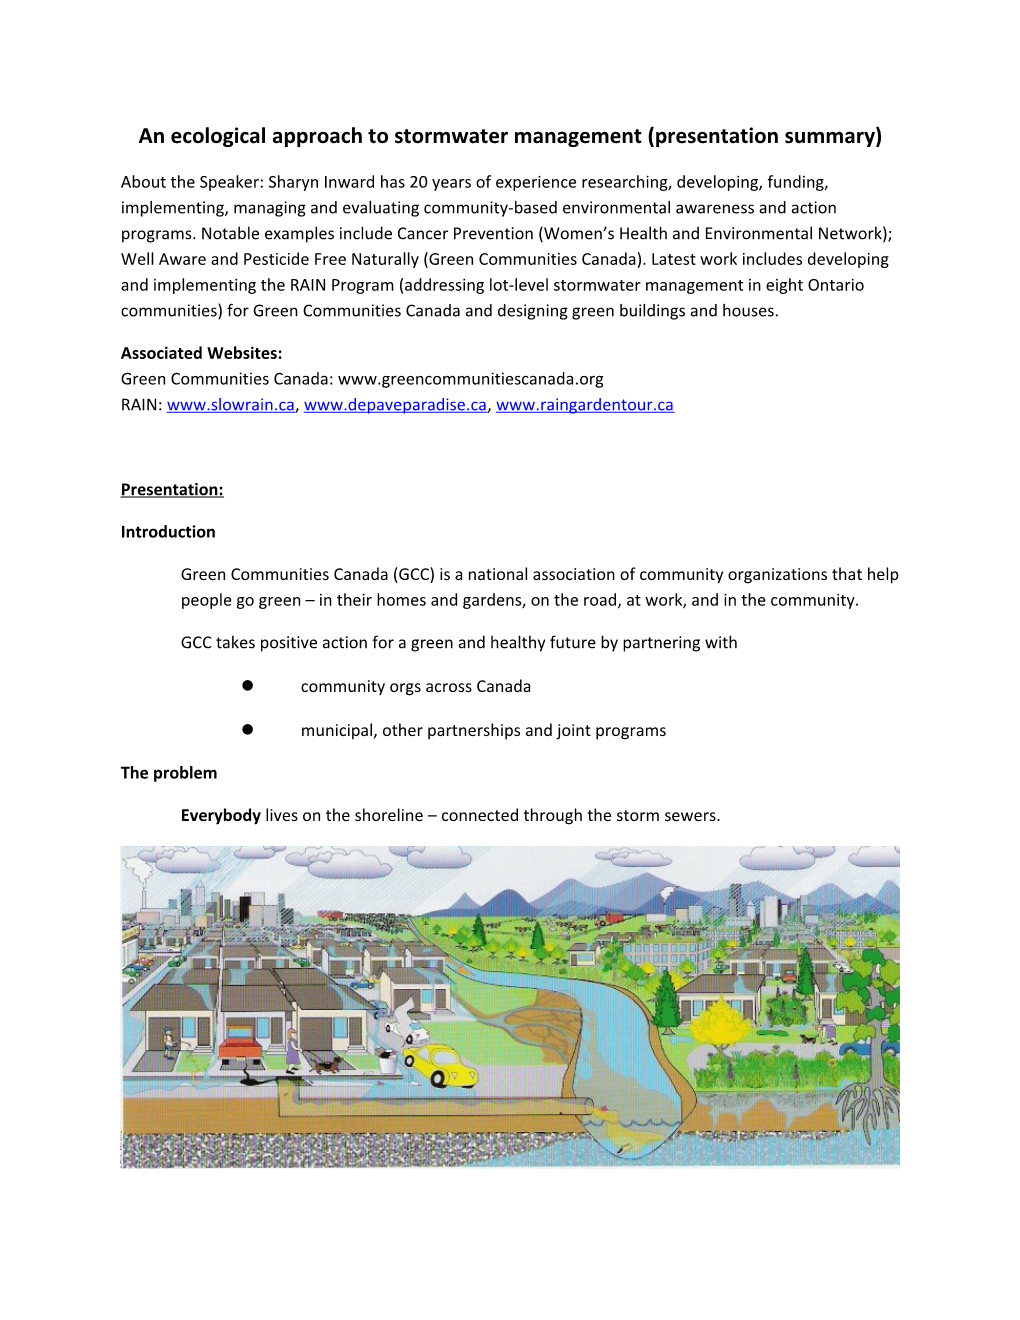 An Ecological Approach to Stormwater Management (Presentation Summary)